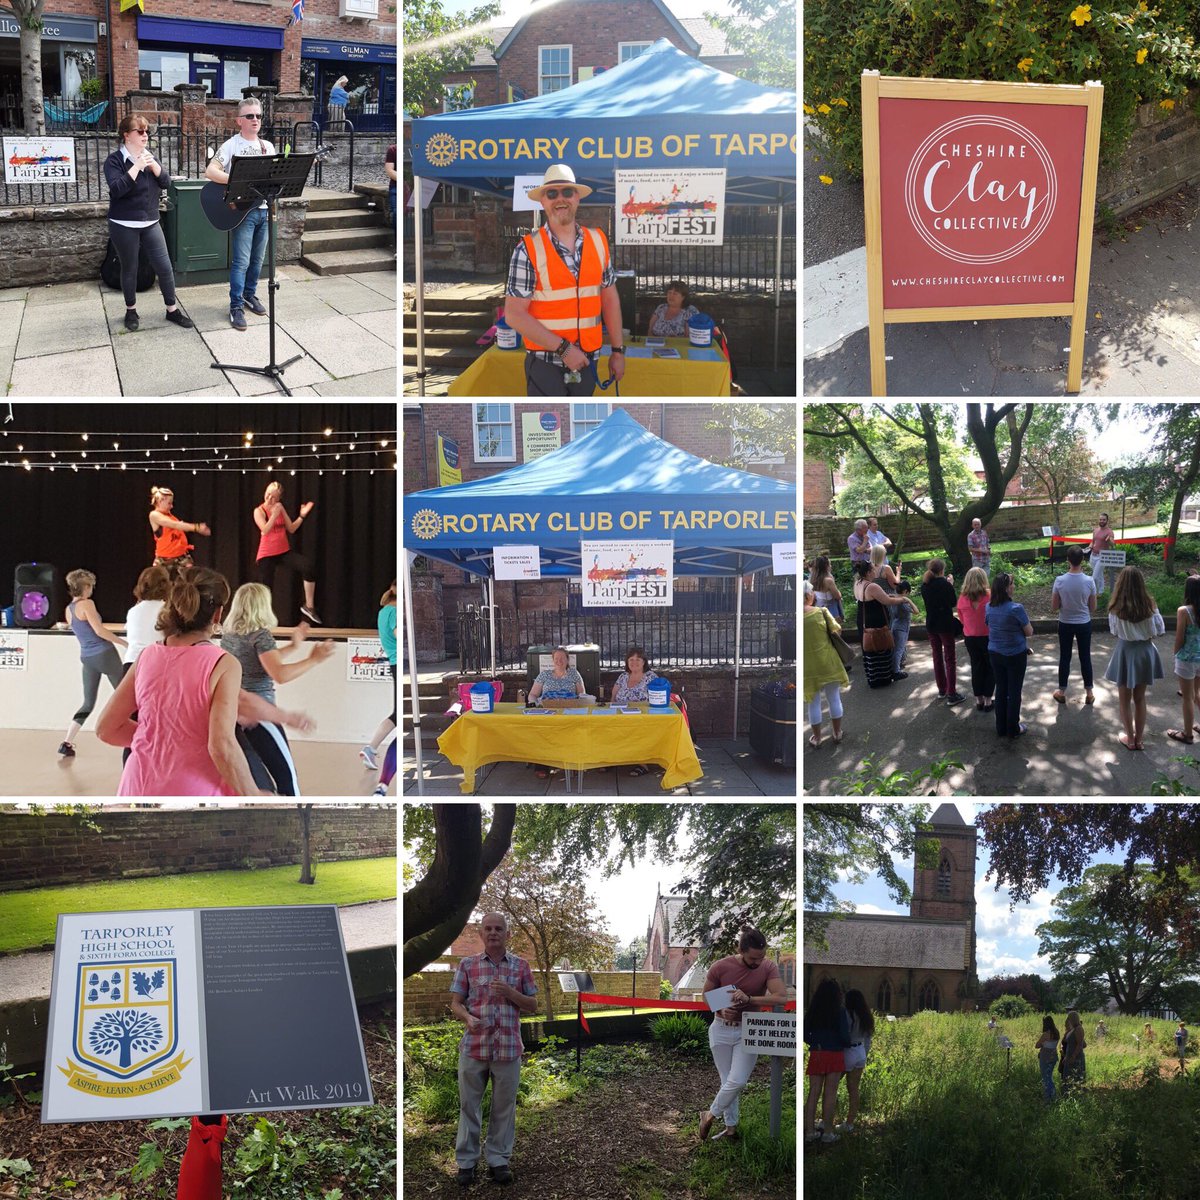 Here’s a selection from the first day of #tarpfest2019! There’s much more on today (Sunday) so do head over to Tarporley!#tarpfest2019 #tarporley